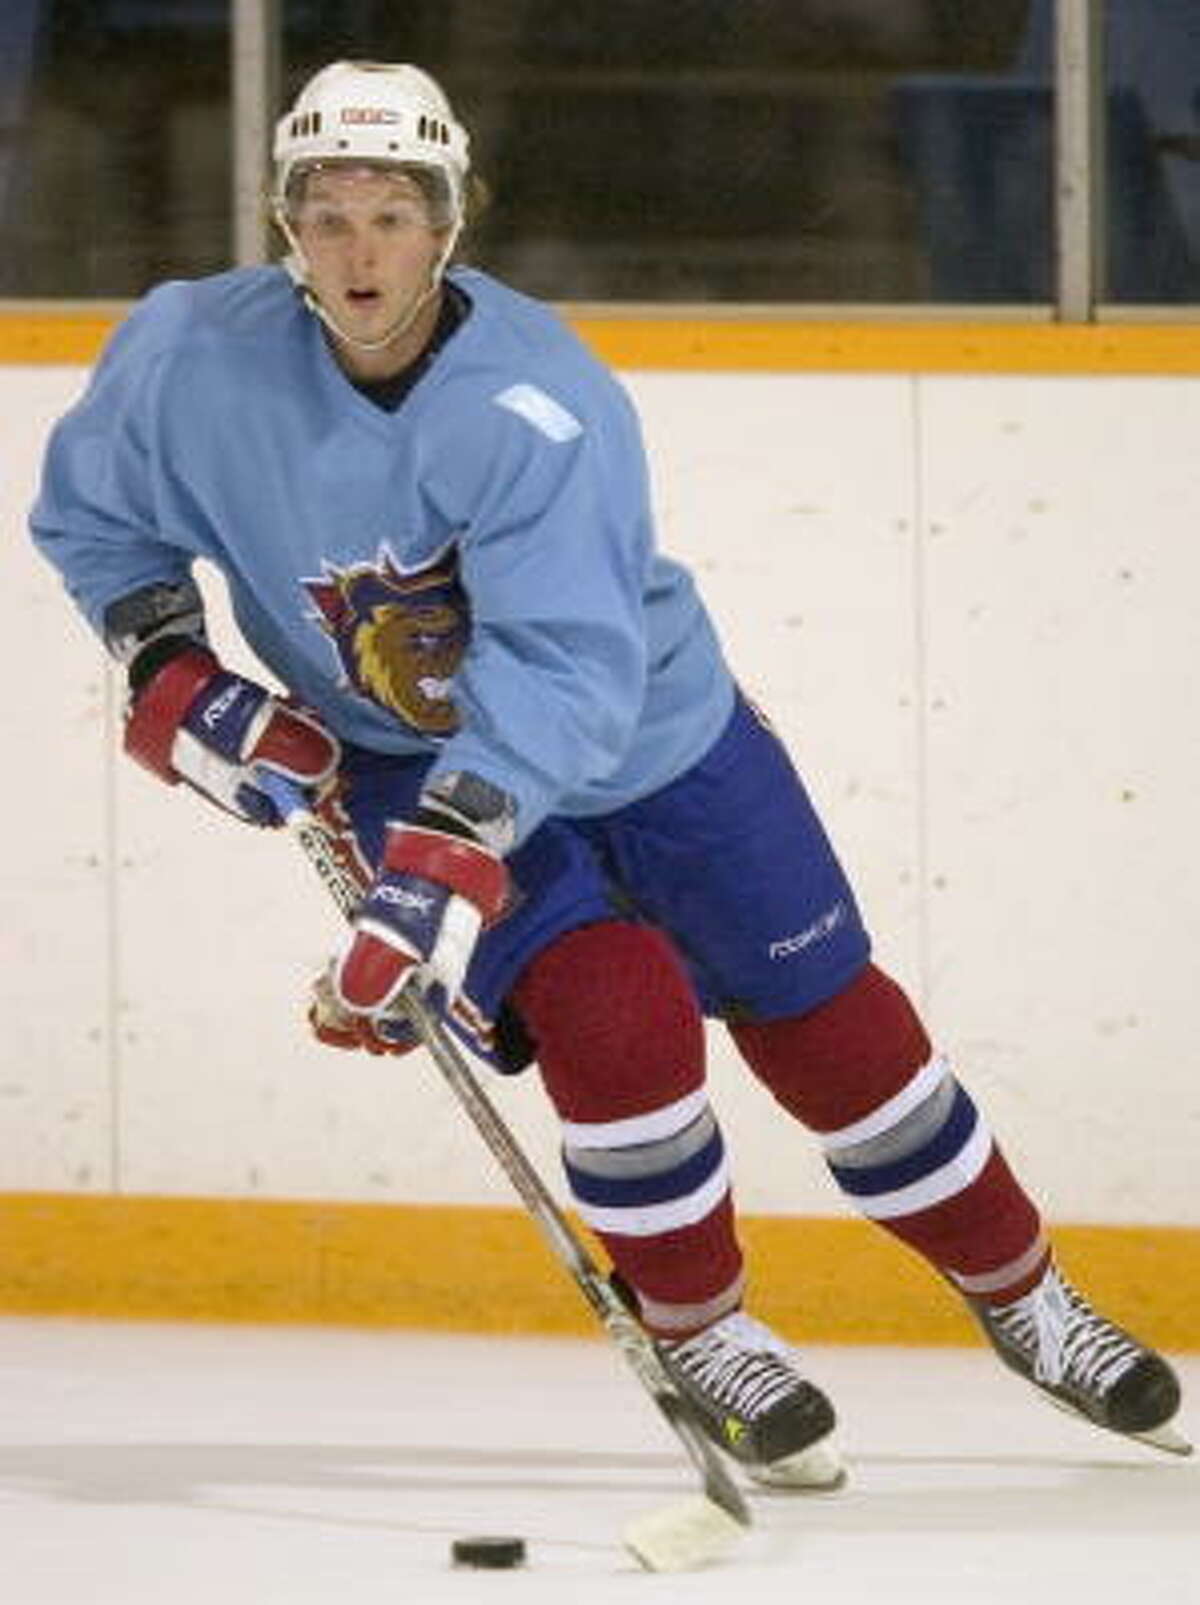 File photo: Hamilton Bulldogs center Corey Locke skates with the puck during the hockey team's practice in Hamilton, Ontario. The Minnesota Wild traded defenseman Shawn Belle to the Montreal Canadiens for Locke and signed minor-leaguer Krys Kolanos to a two-way contrac.